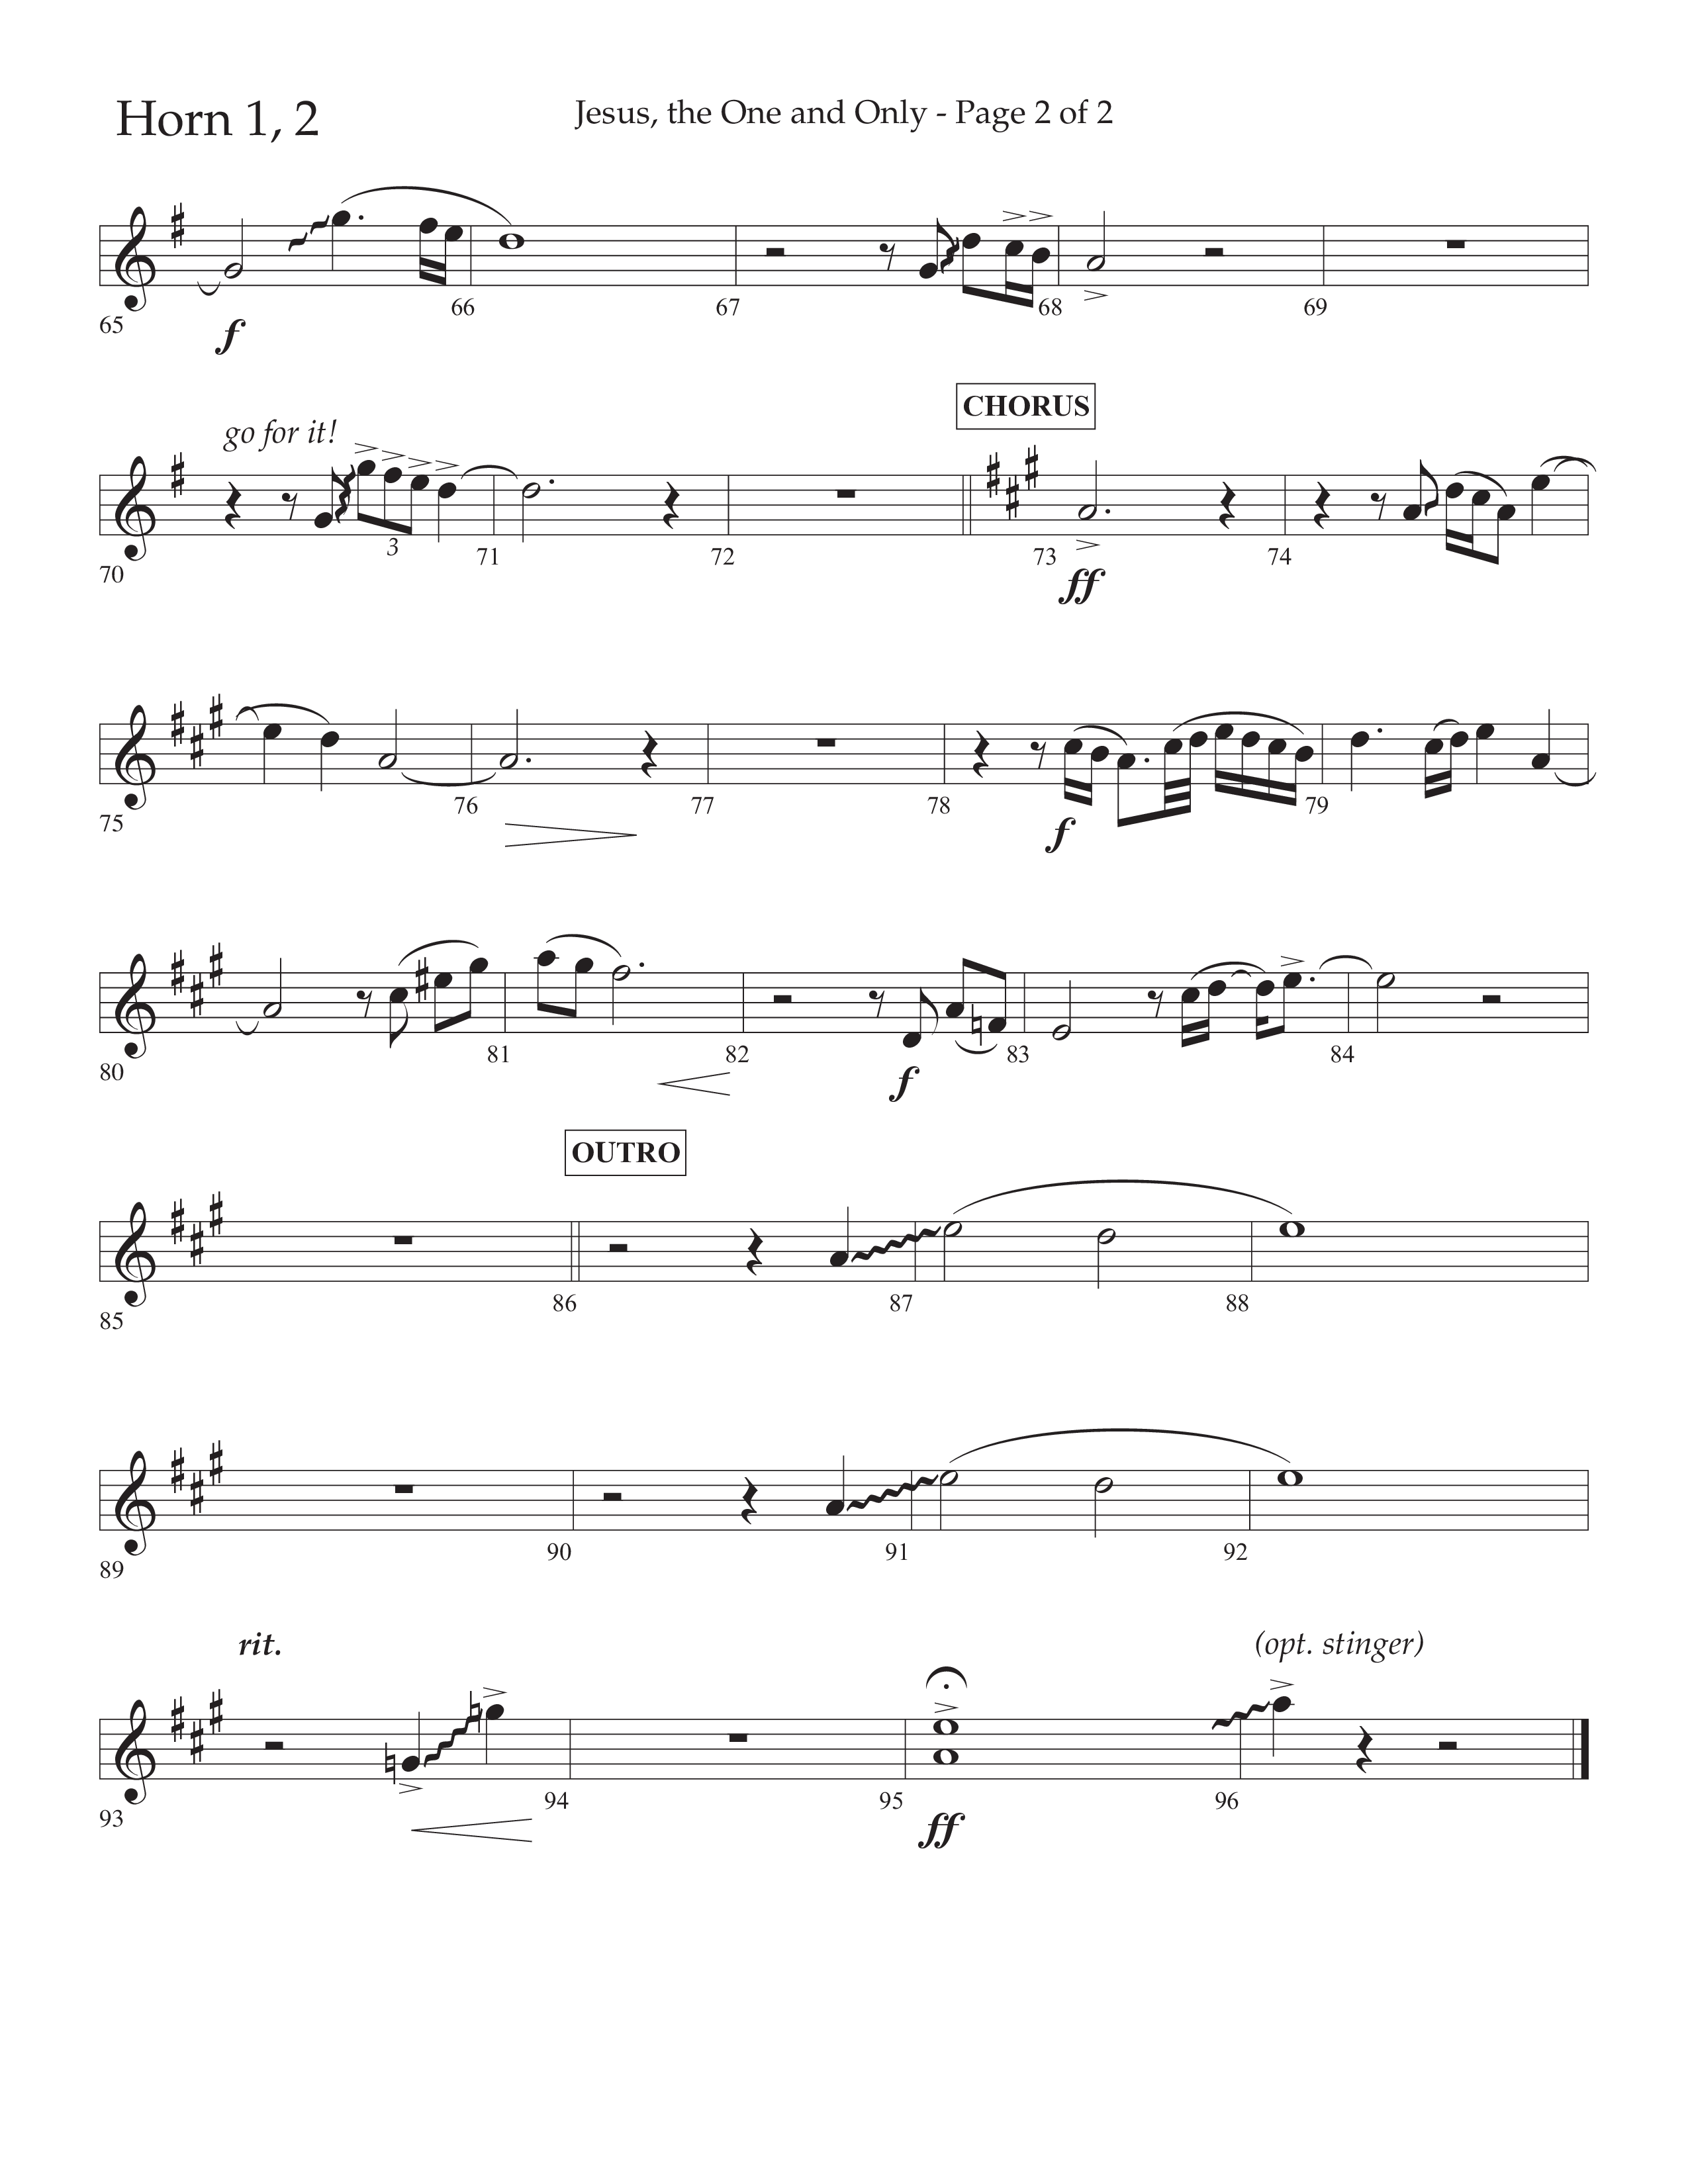 Jesus The One And Only (Choral Anthem SATB) French Horn 1/2 (Lifeway Choral / Arr. John Bolin / Arr. Don Koch / Orch. David Shipps)